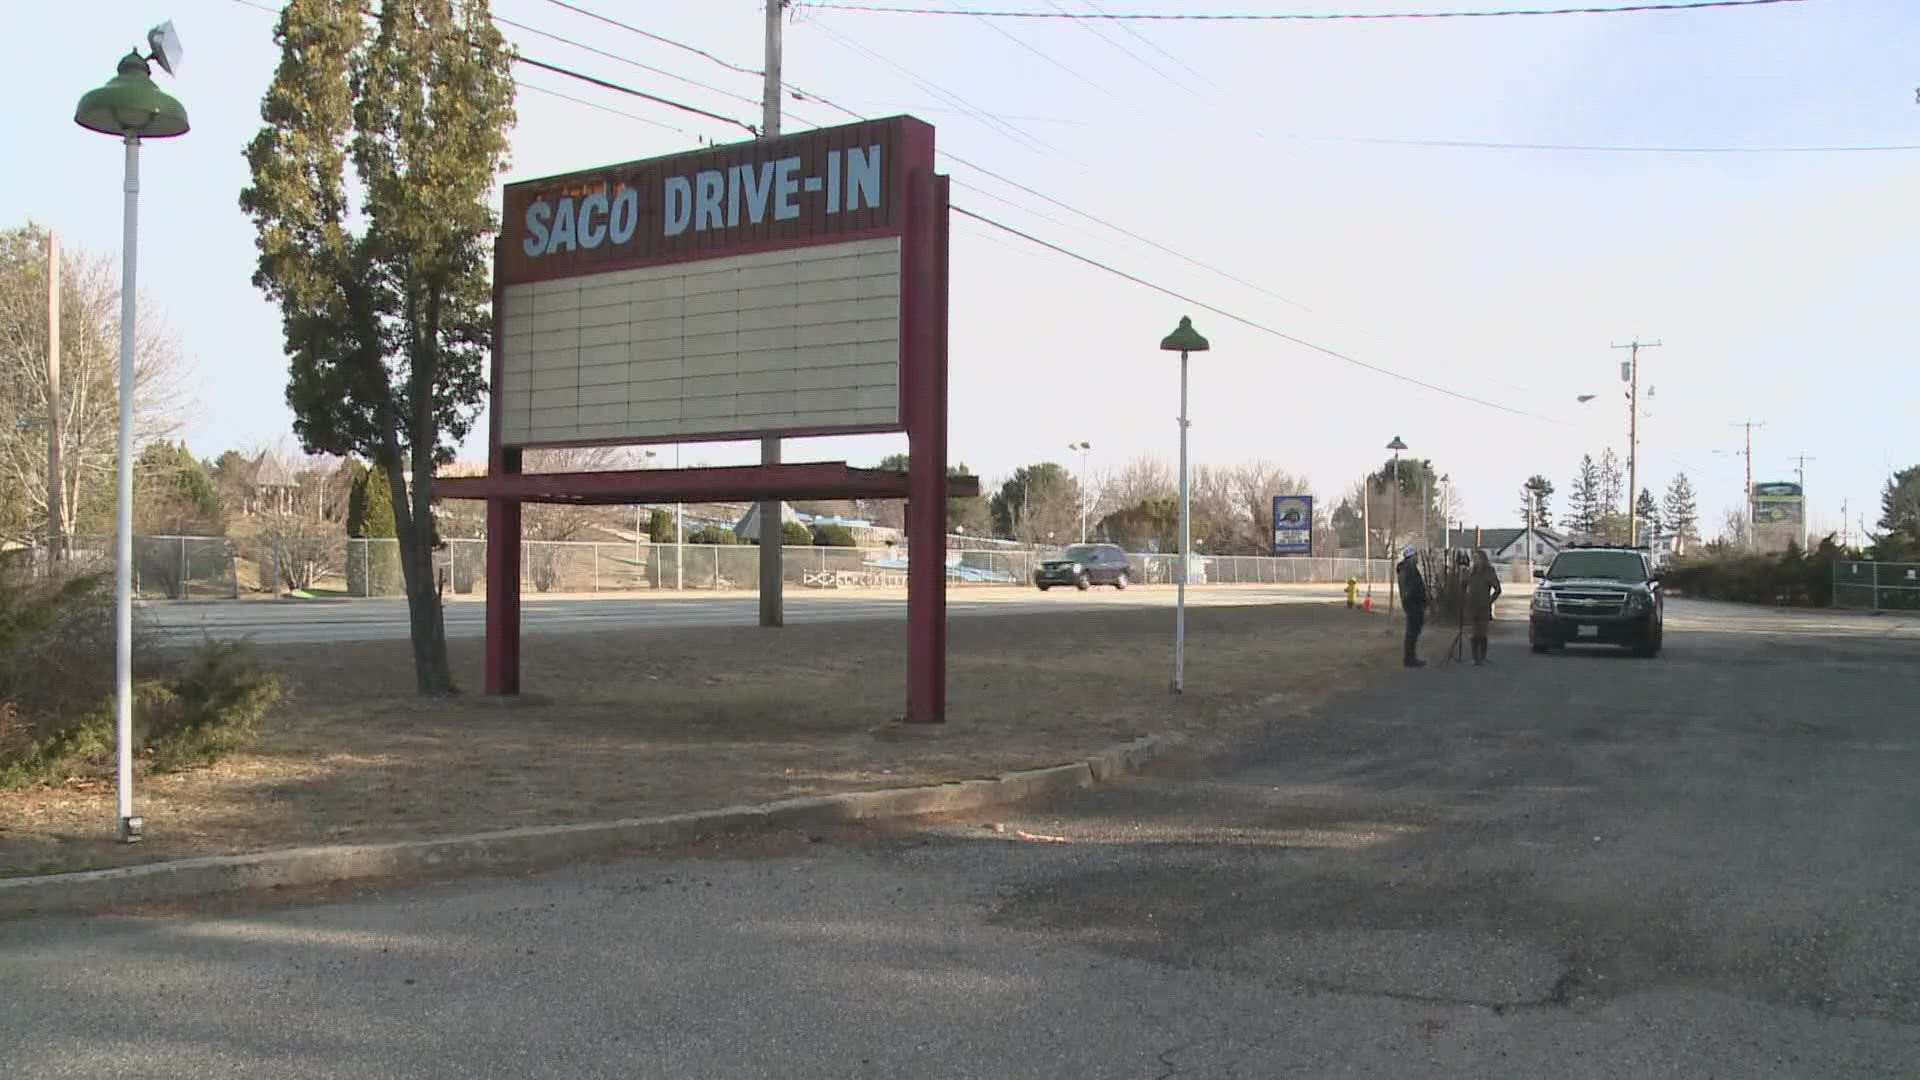 The Saco Drive-In and Happy Wheels Skate Center closed for good but plans have been announced to bring both businesses back.